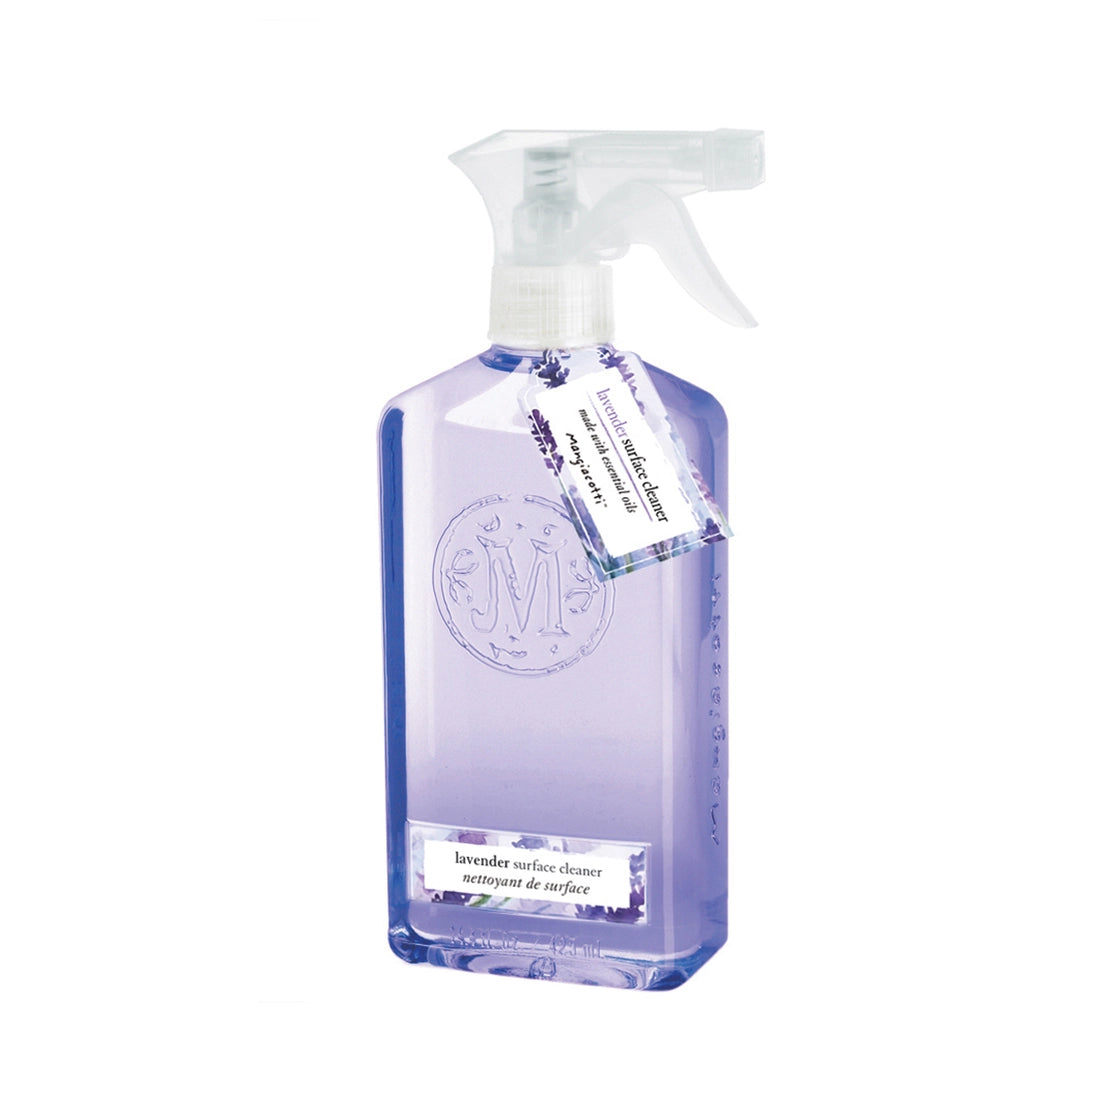 Mangiacotti Lavender Surface Cleaner